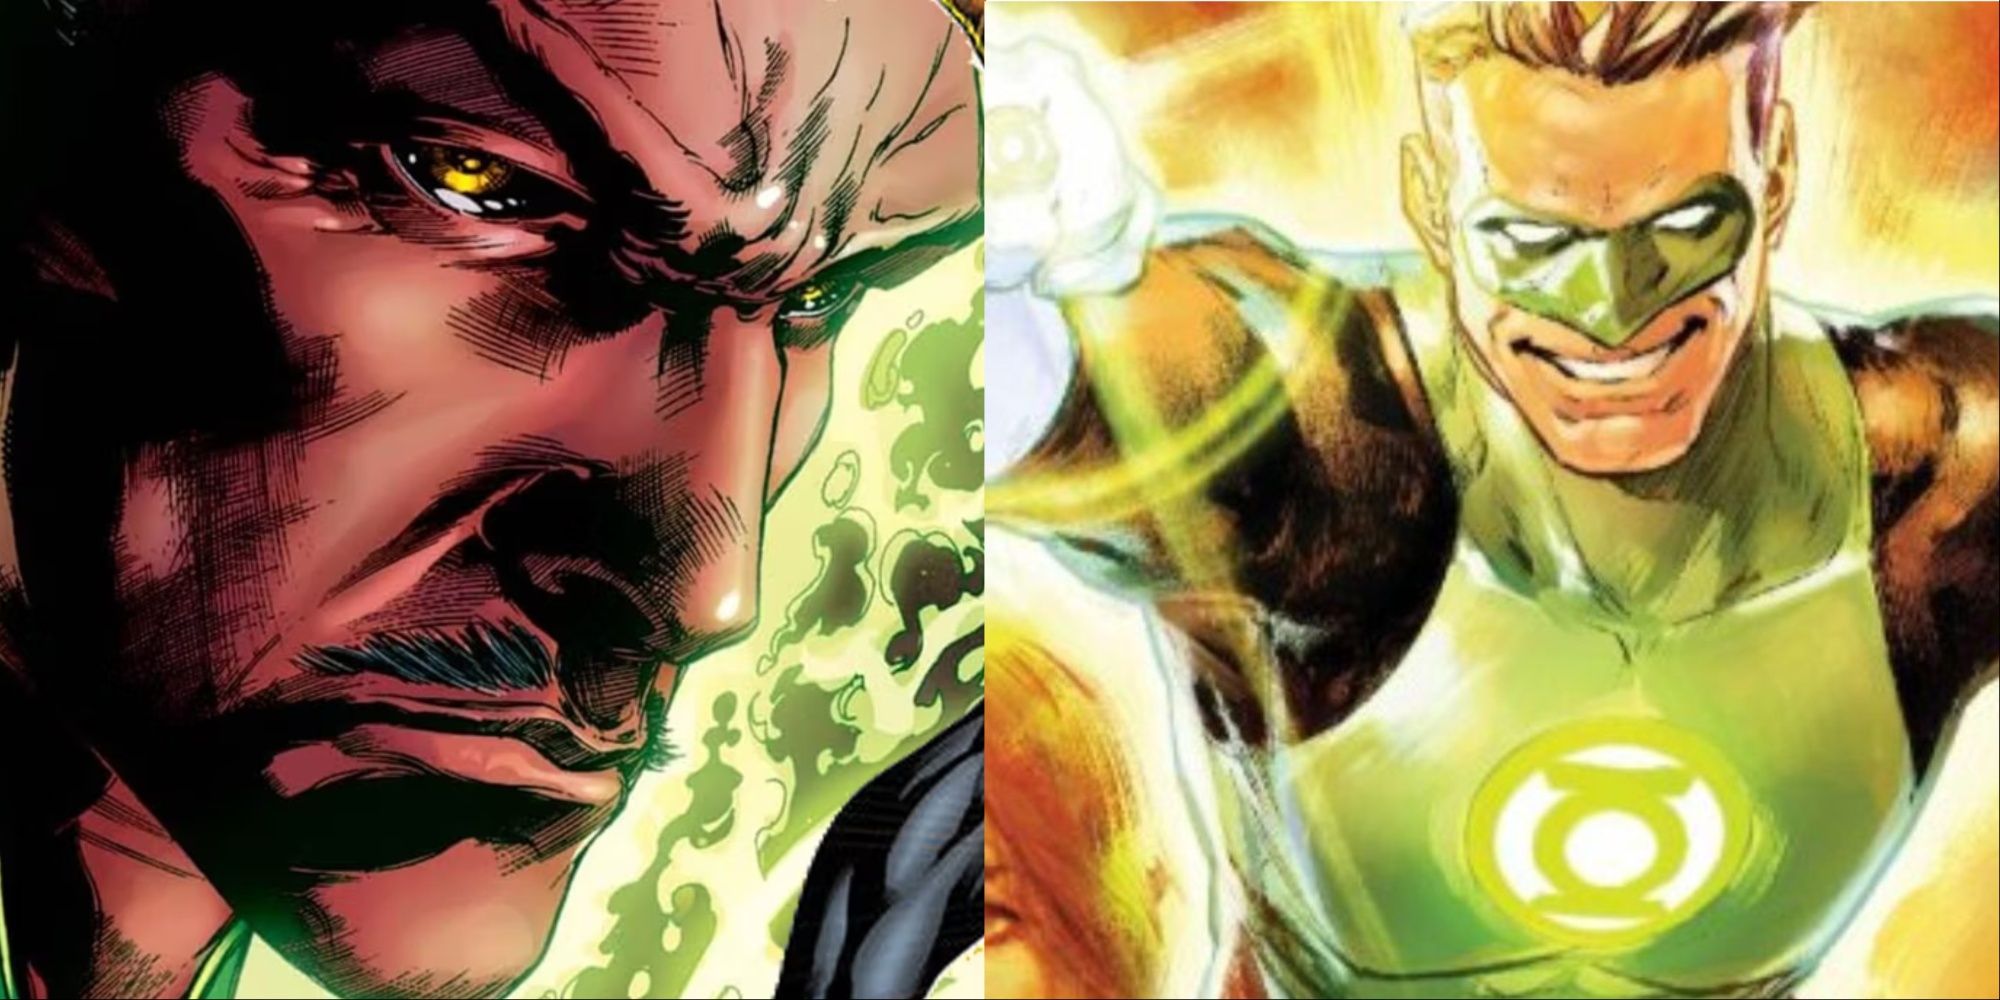 A split image of a scowling Sinestro and a smiling Hal Jordan in DC Comics